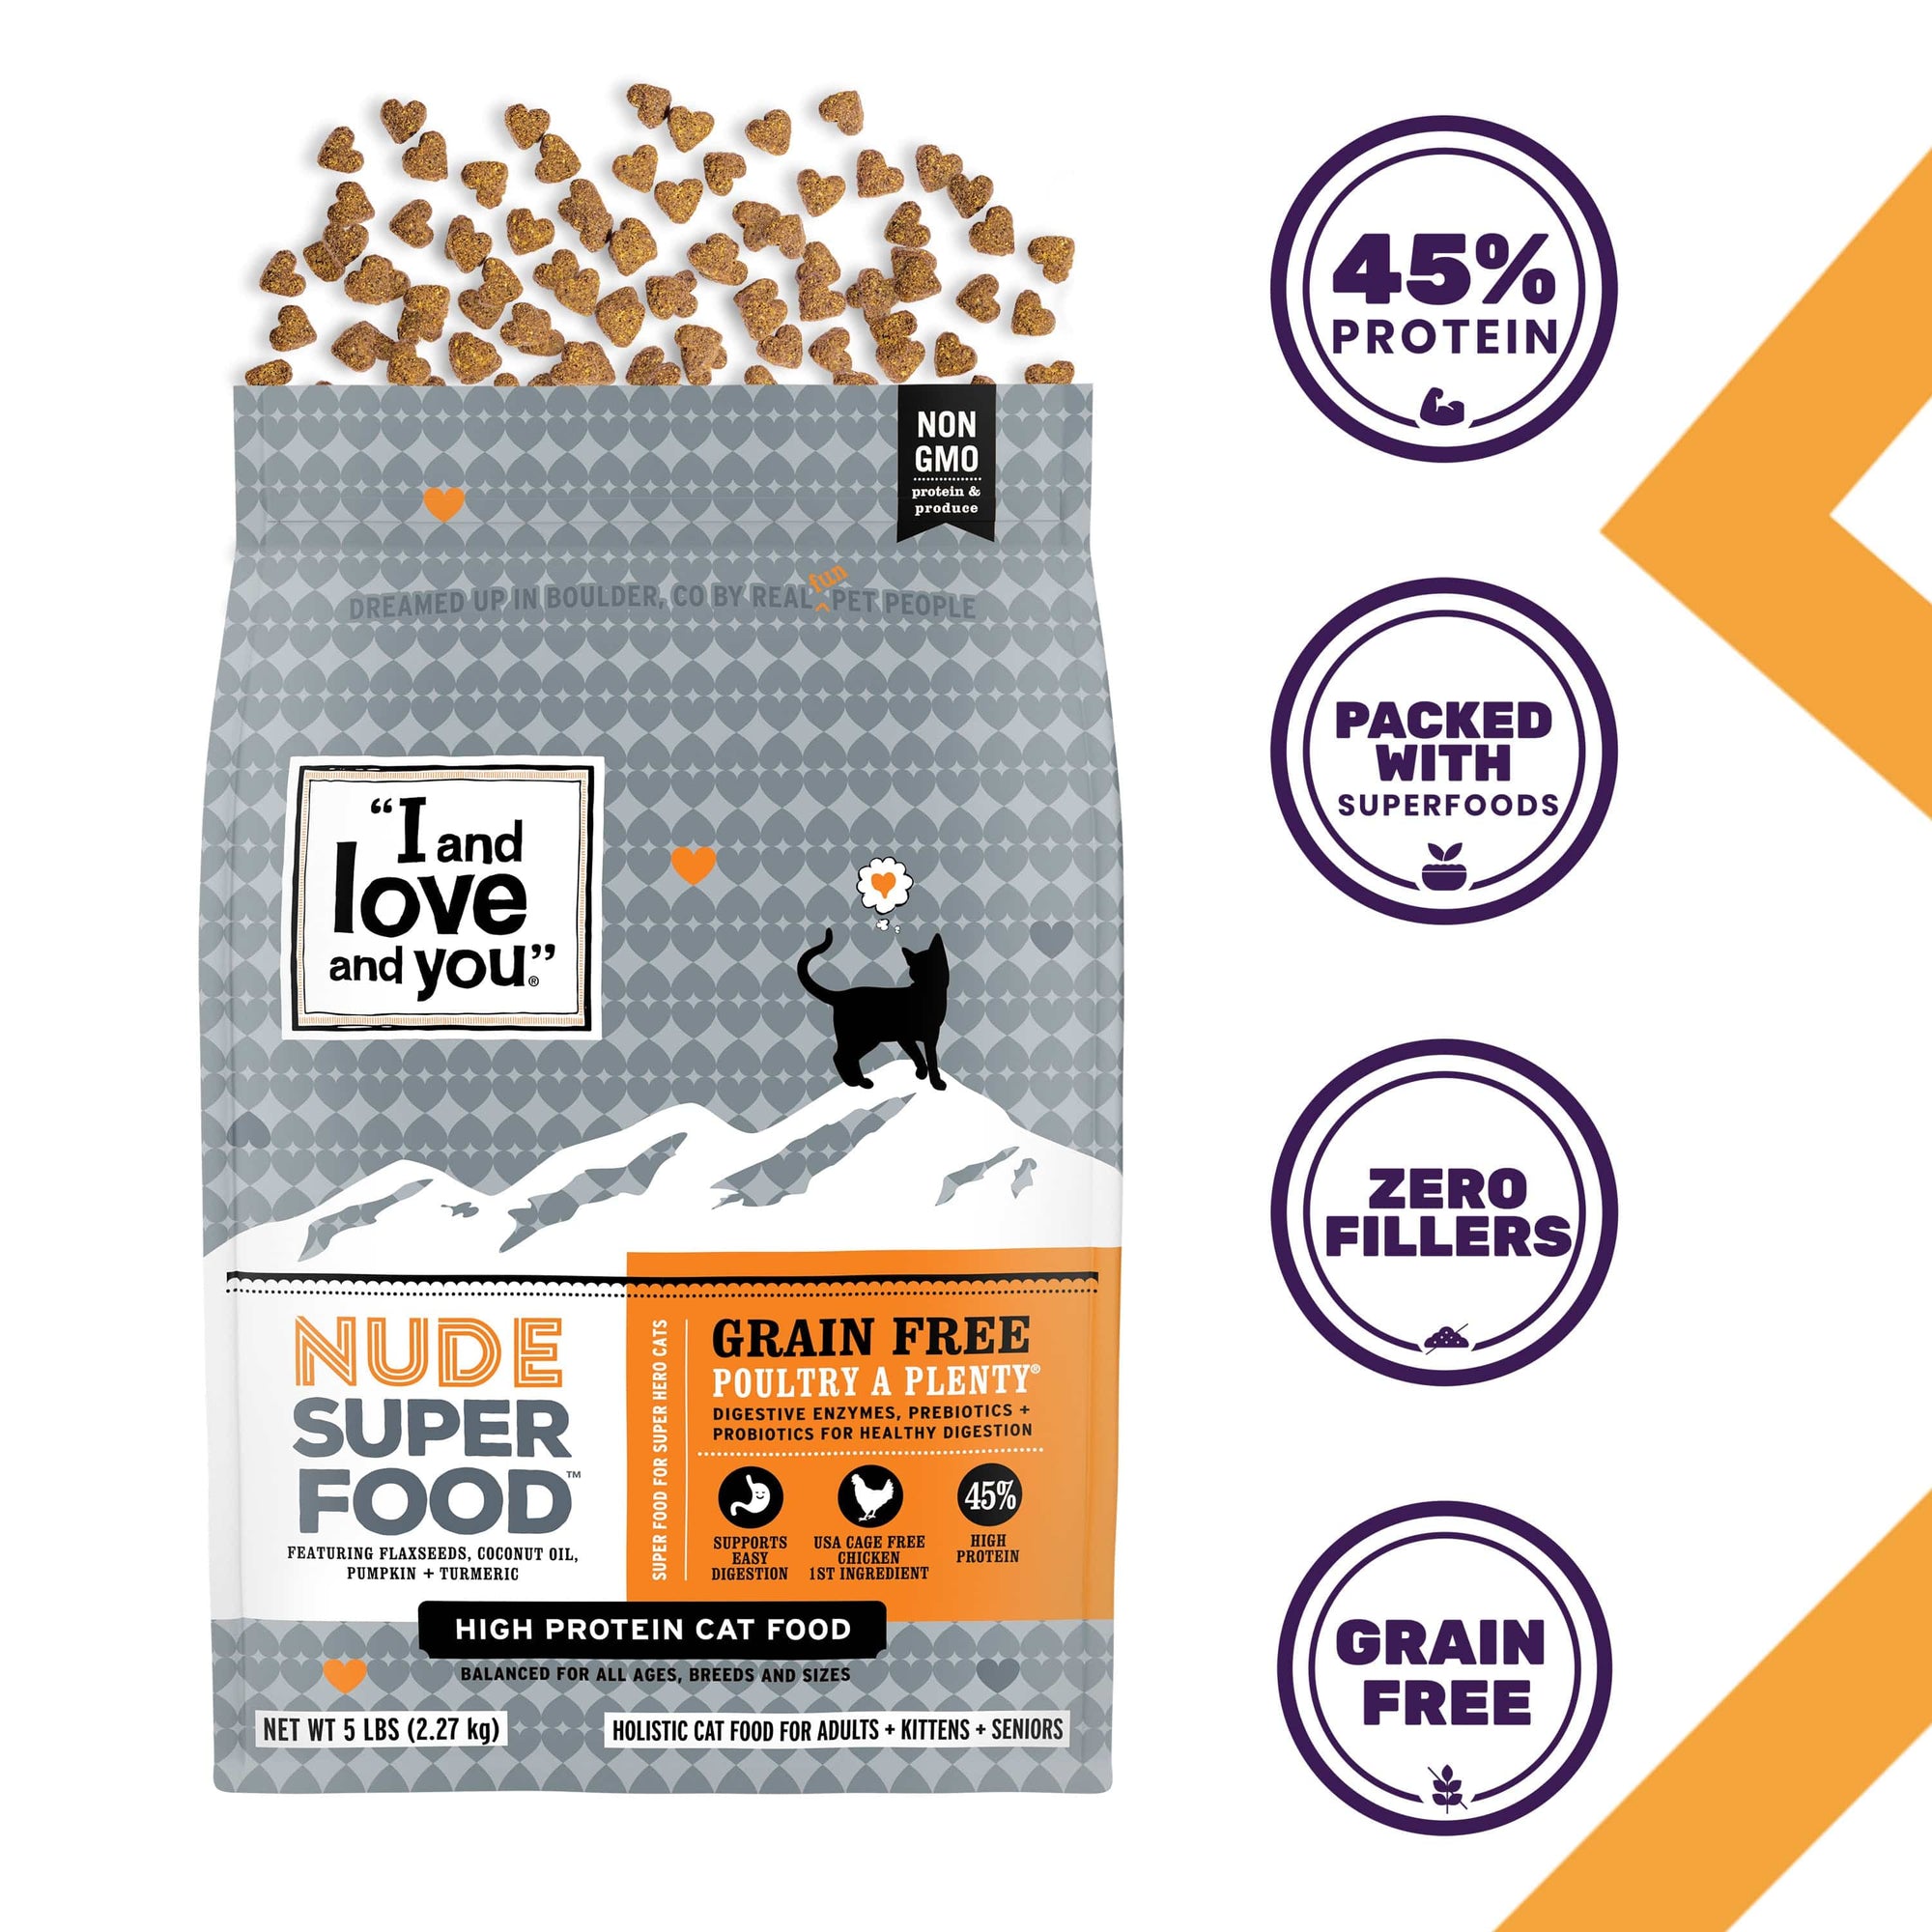 Nude Super Food - Poultry a Plenty: Bag of cat food with premium kibble, meat protein, superfoods, and digestive enzymes for a healthy cat glow-up.